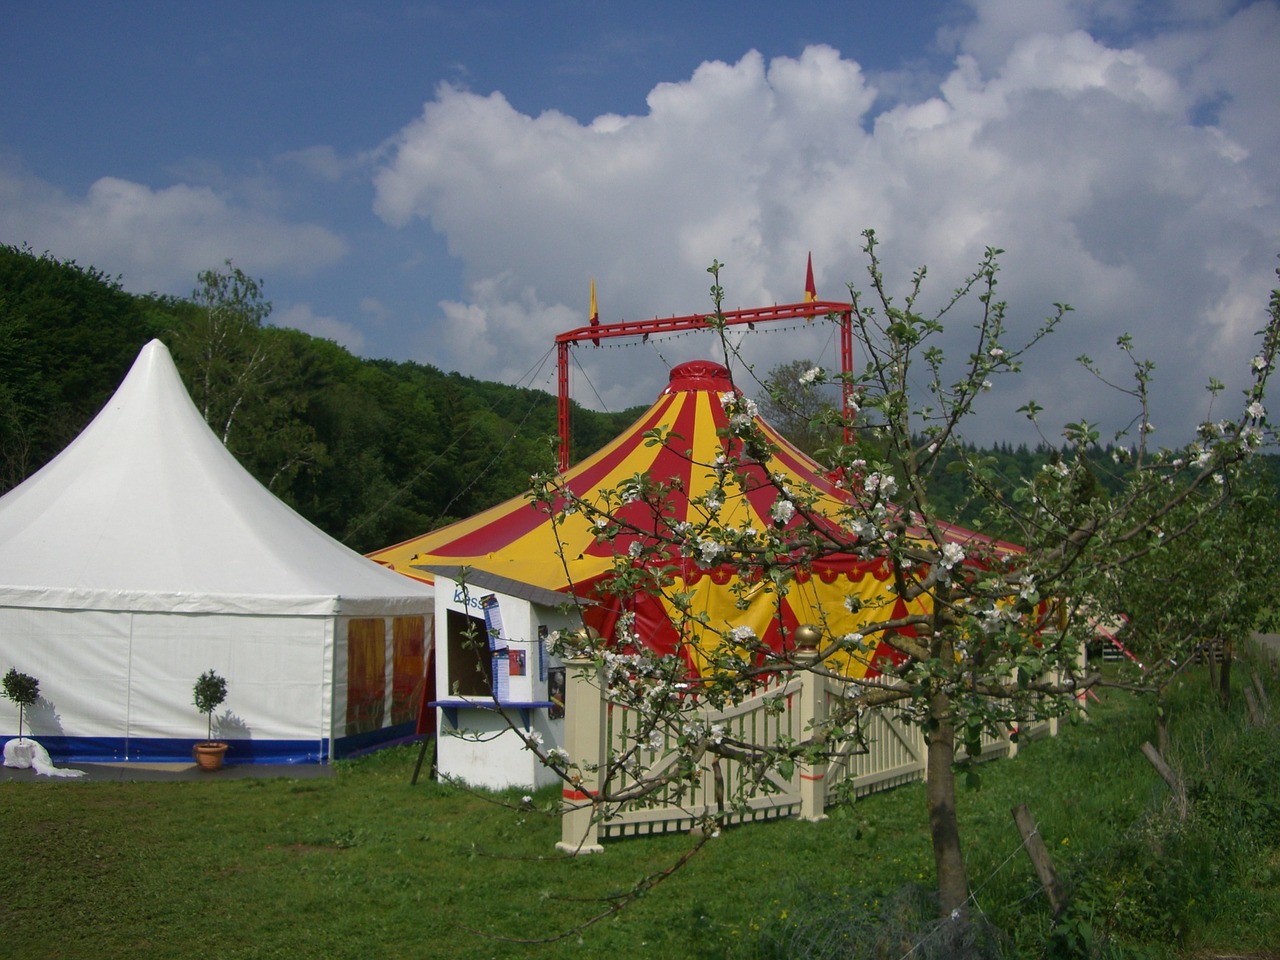 circus tent circus in the green tent free photo